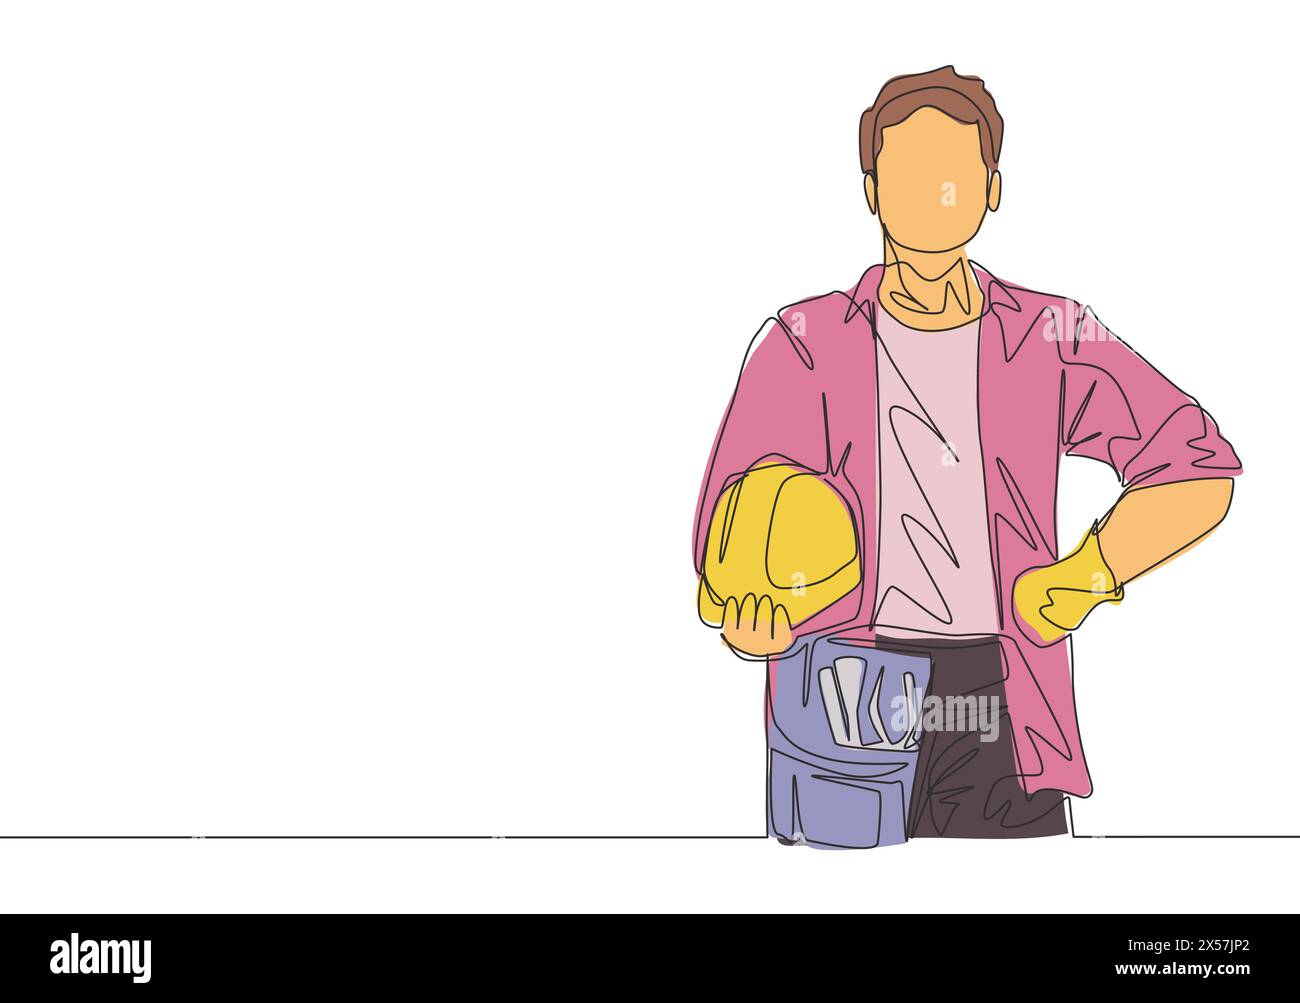 One single line drawing of young craftsman wearing building construction uniform while holding helmet. Handyman house renovation service concept. Cont Stock Vector